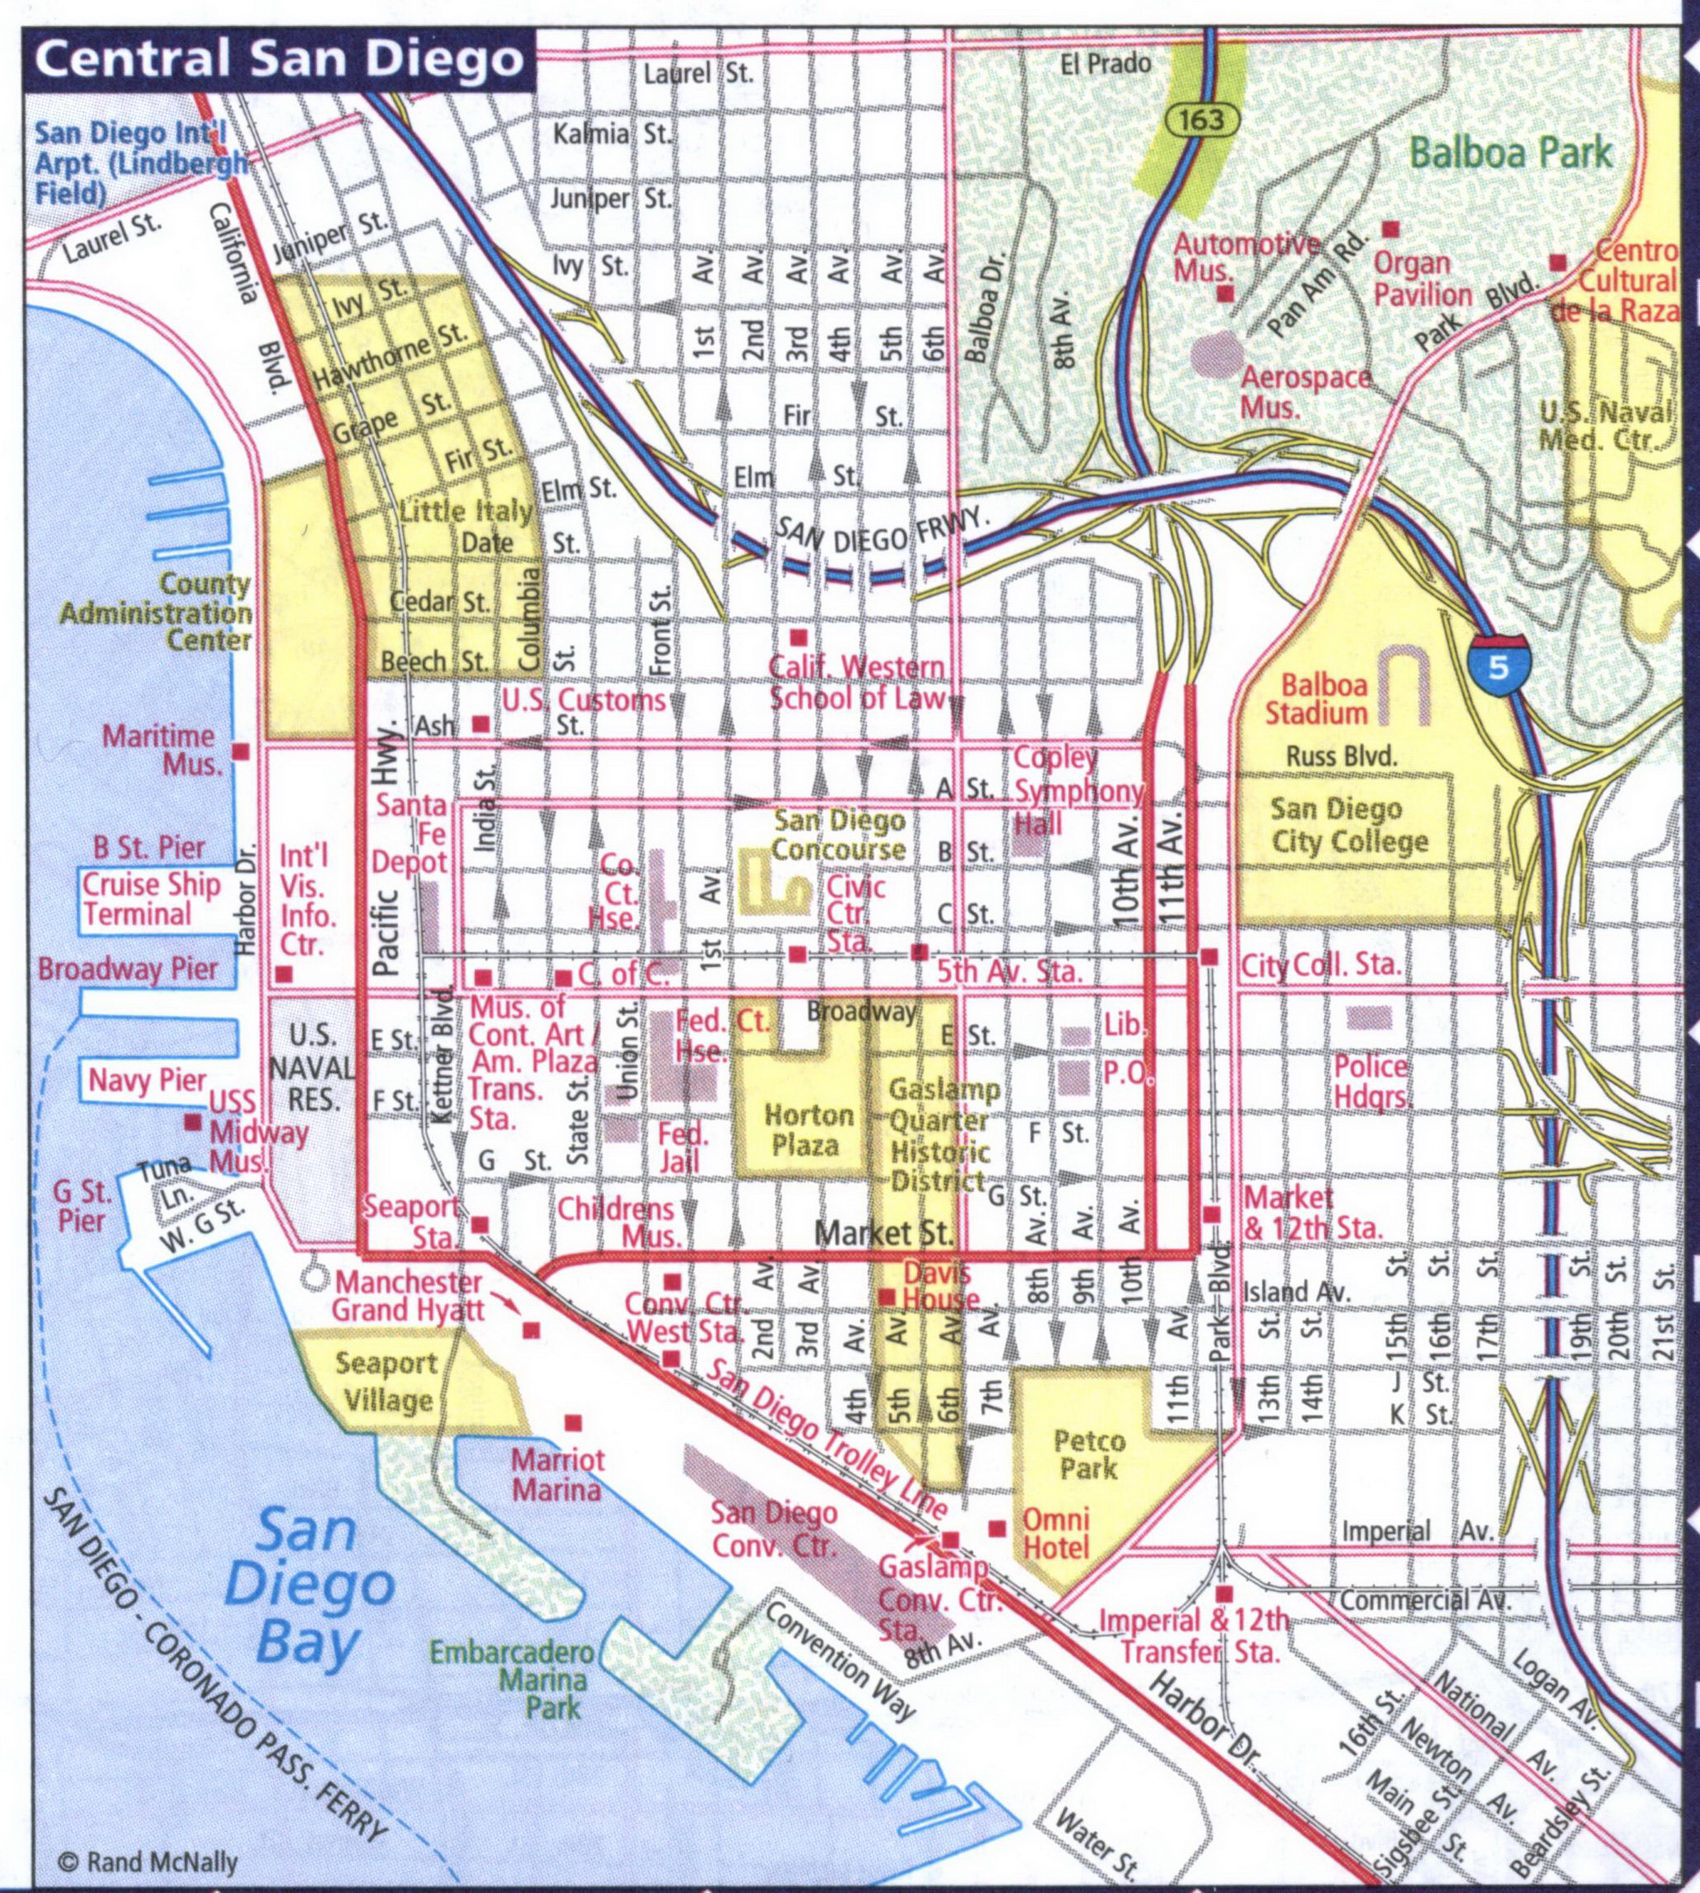 Map of Central San Diego